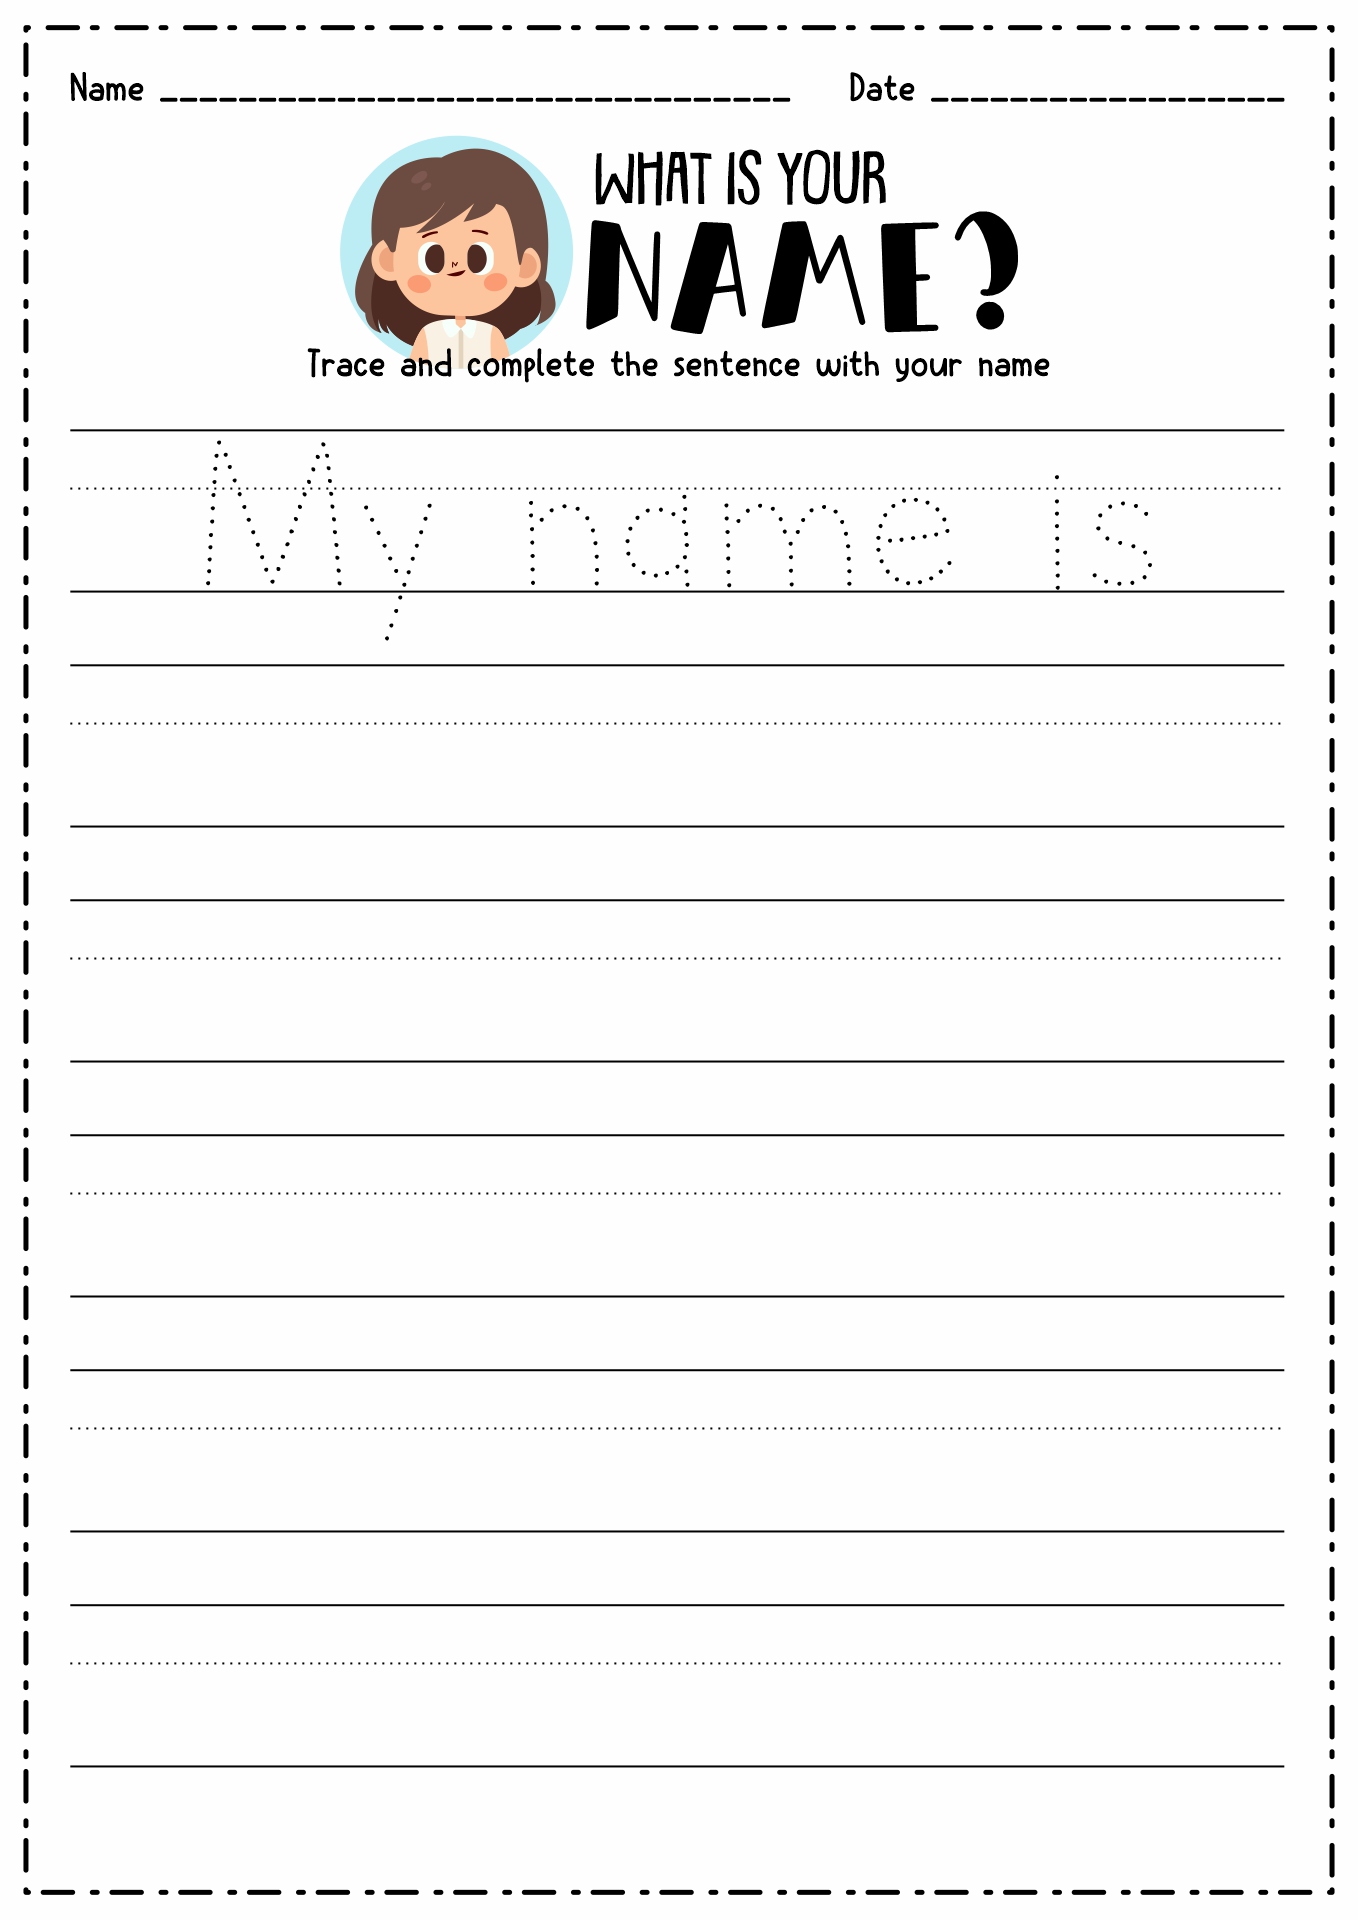 14-best-images-of-create-name-tracing-worksheets-create-your-own-tracing-name-worksheet-free